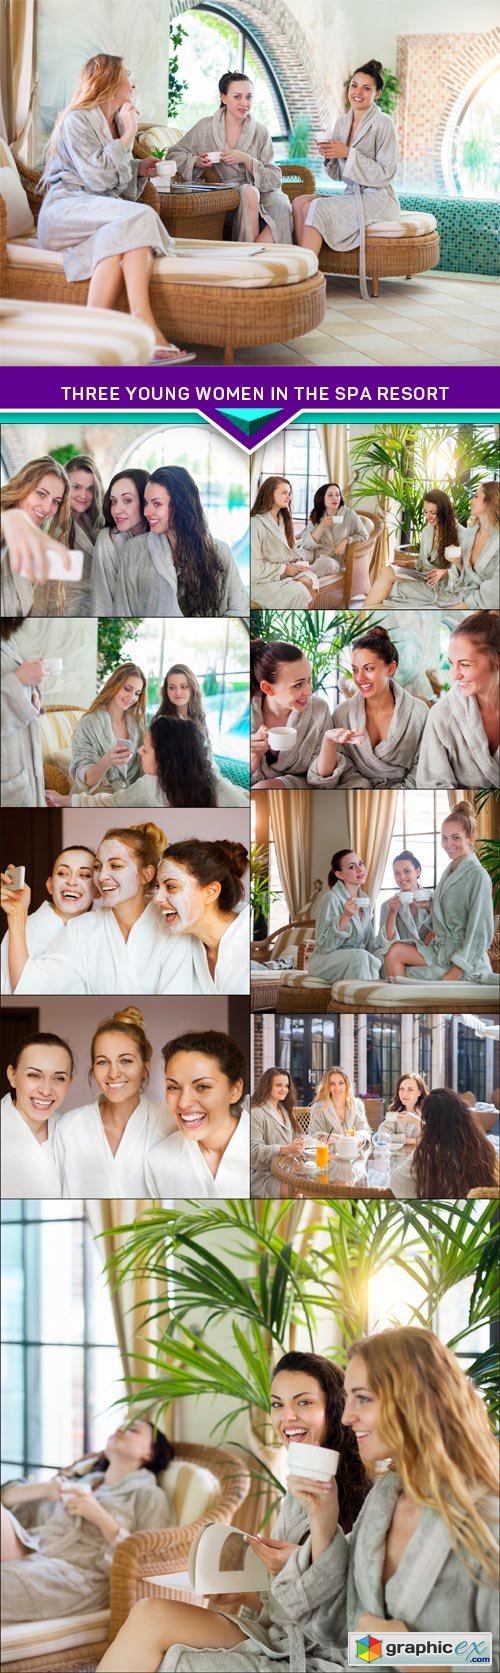 Three young women in the spa resort 10X JPEG